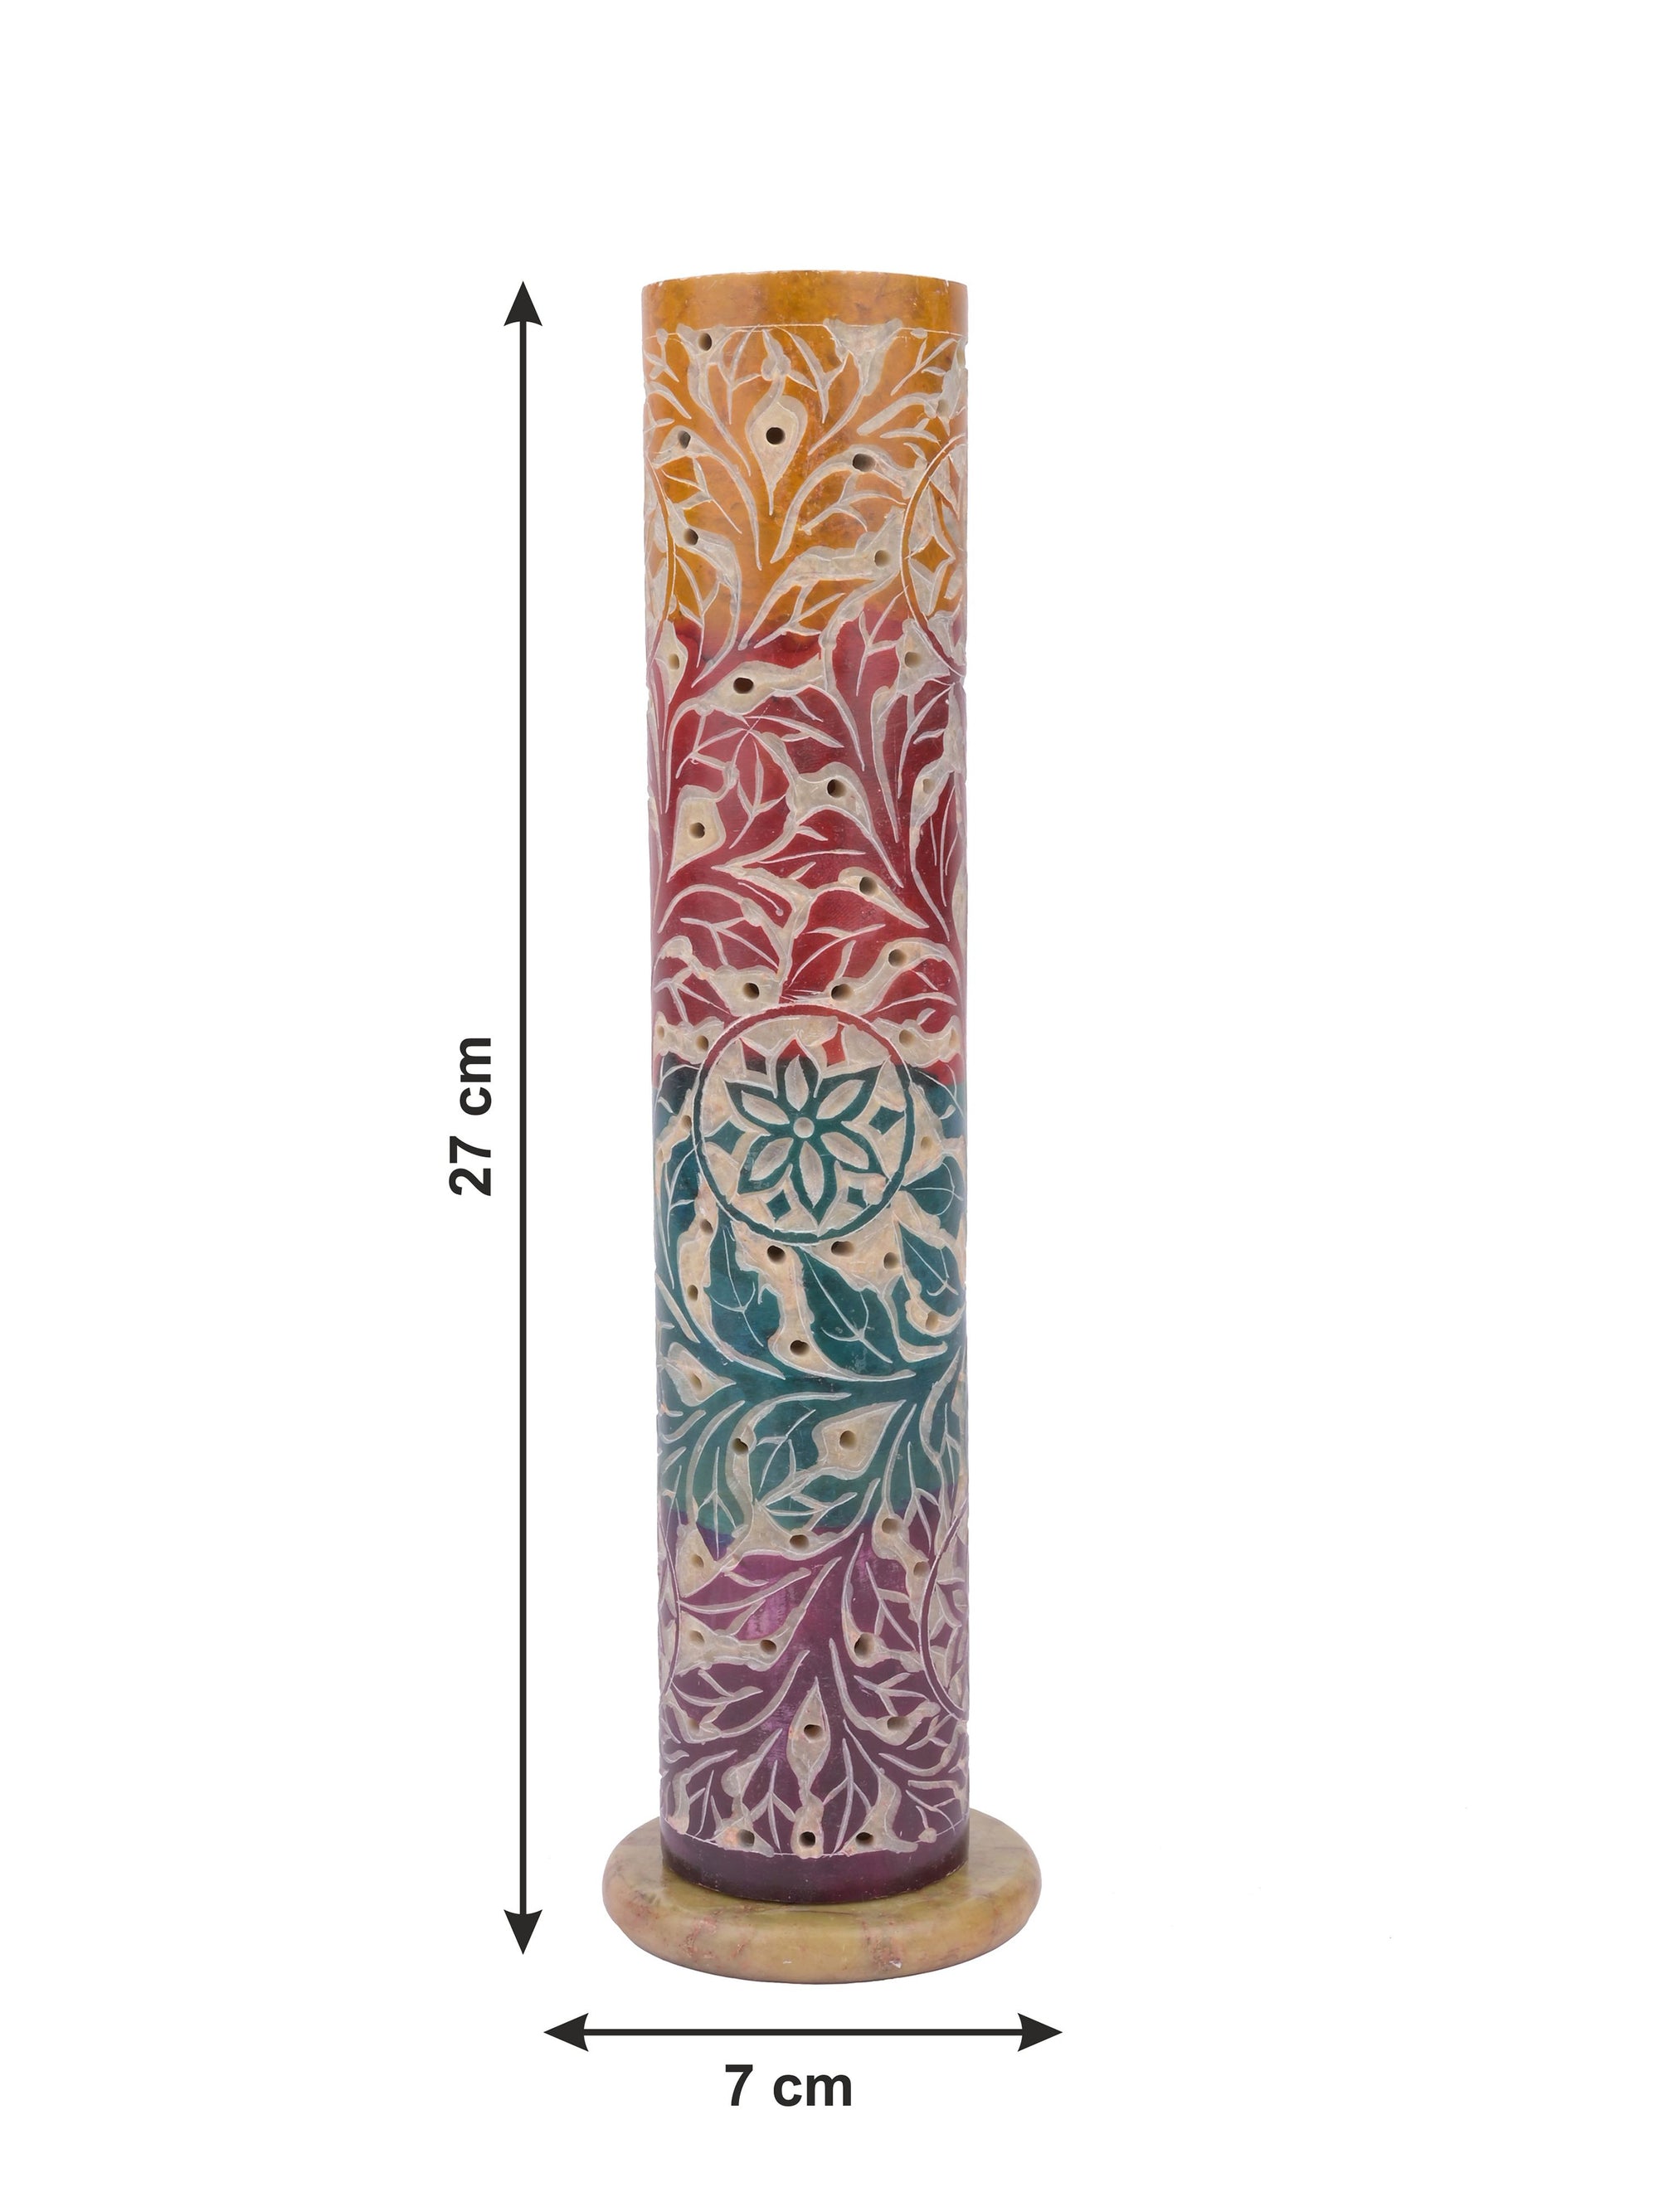 Soapstone carved colorful Incense Stick / Agarbatti Holder - 10 inches height - The Heritage Artifacts